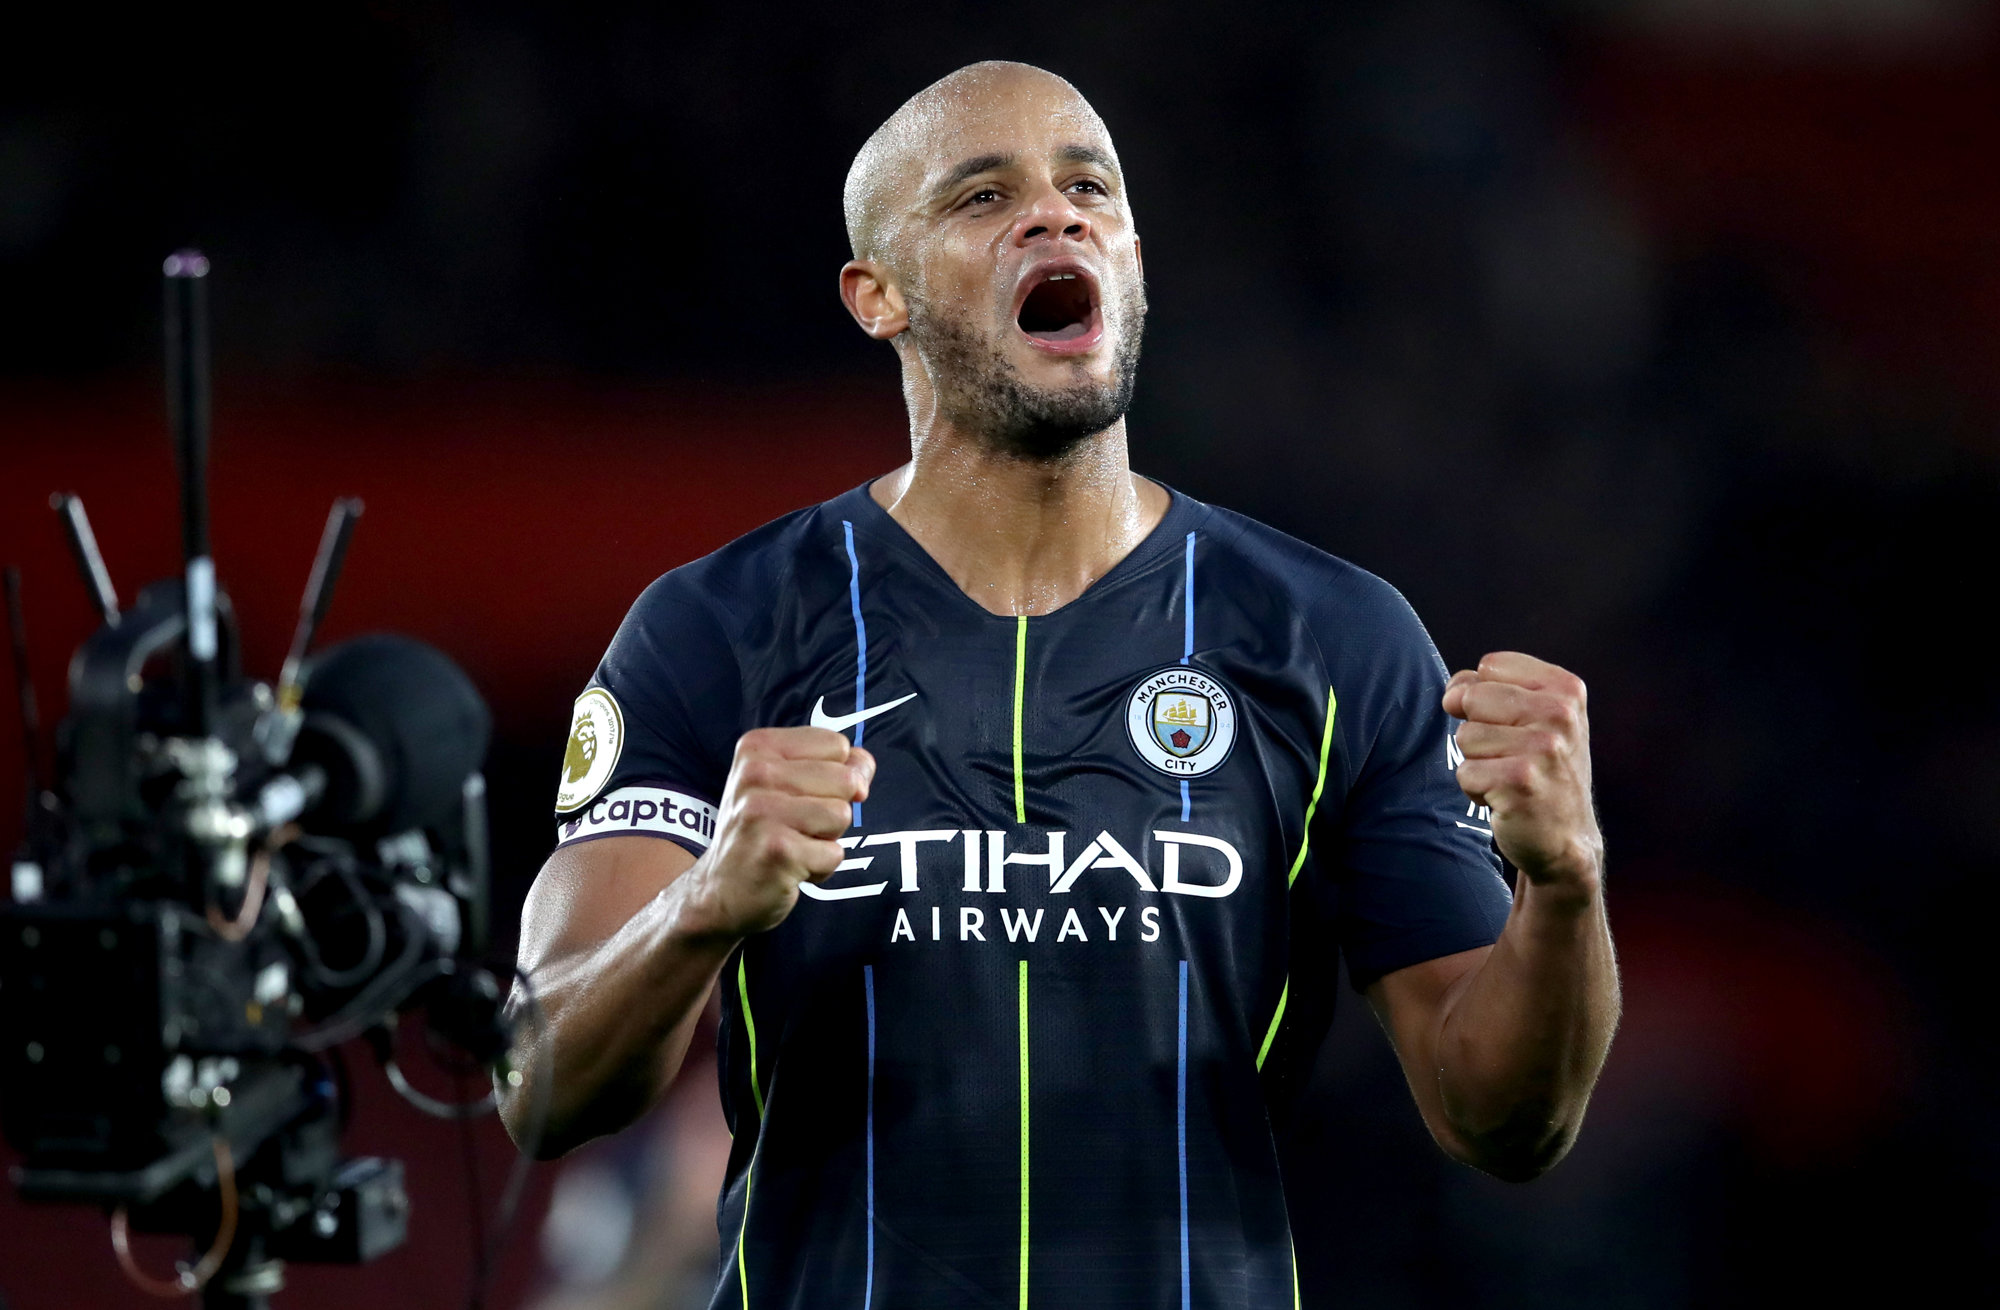 Captain Vincent Kompany To Lead Manchester City To Premier League Glory In The Final Fpl